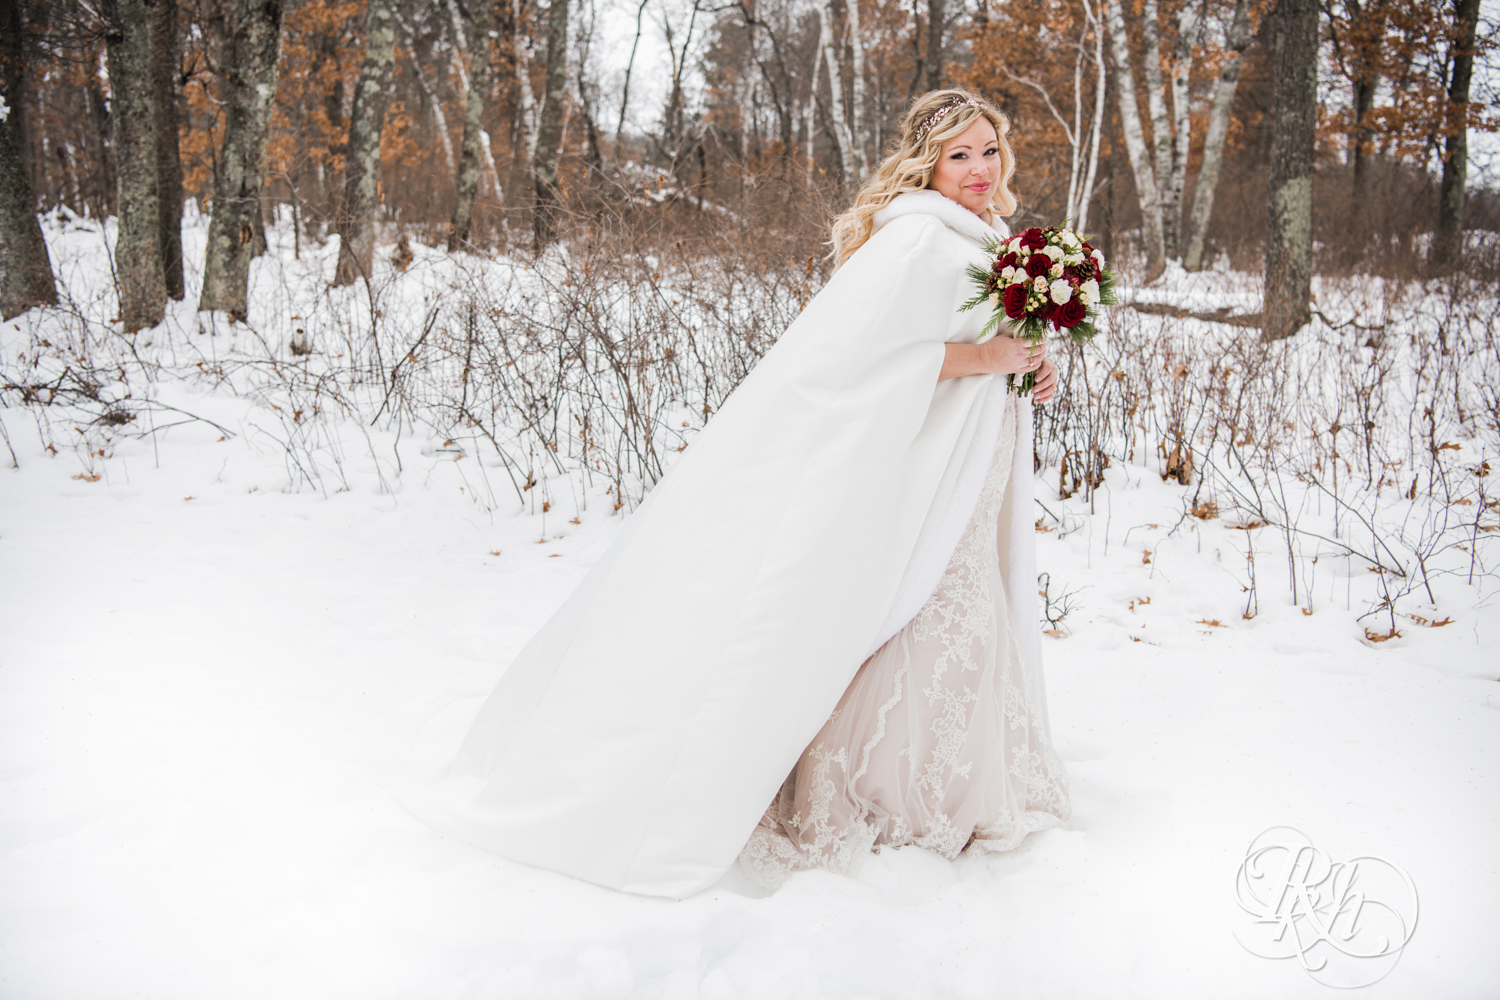 Bride holds roses in snow during winter wedding at Whitefish Lodge in Crosslake, Minnesota.